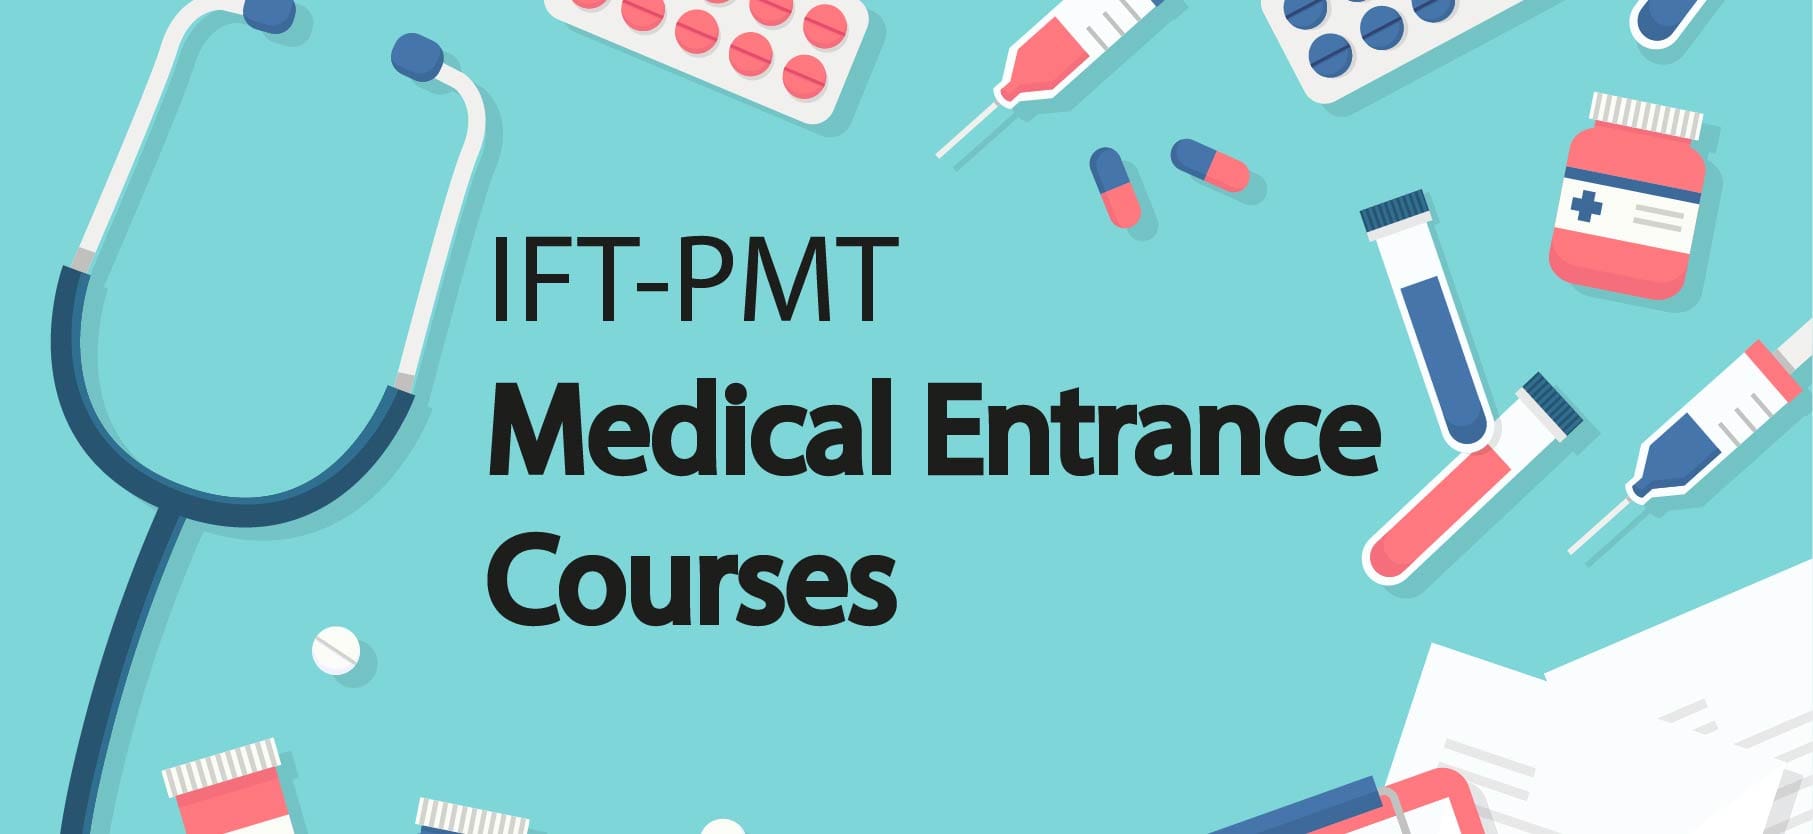 Medical Entrance Preparation Courses Offered by Igniters